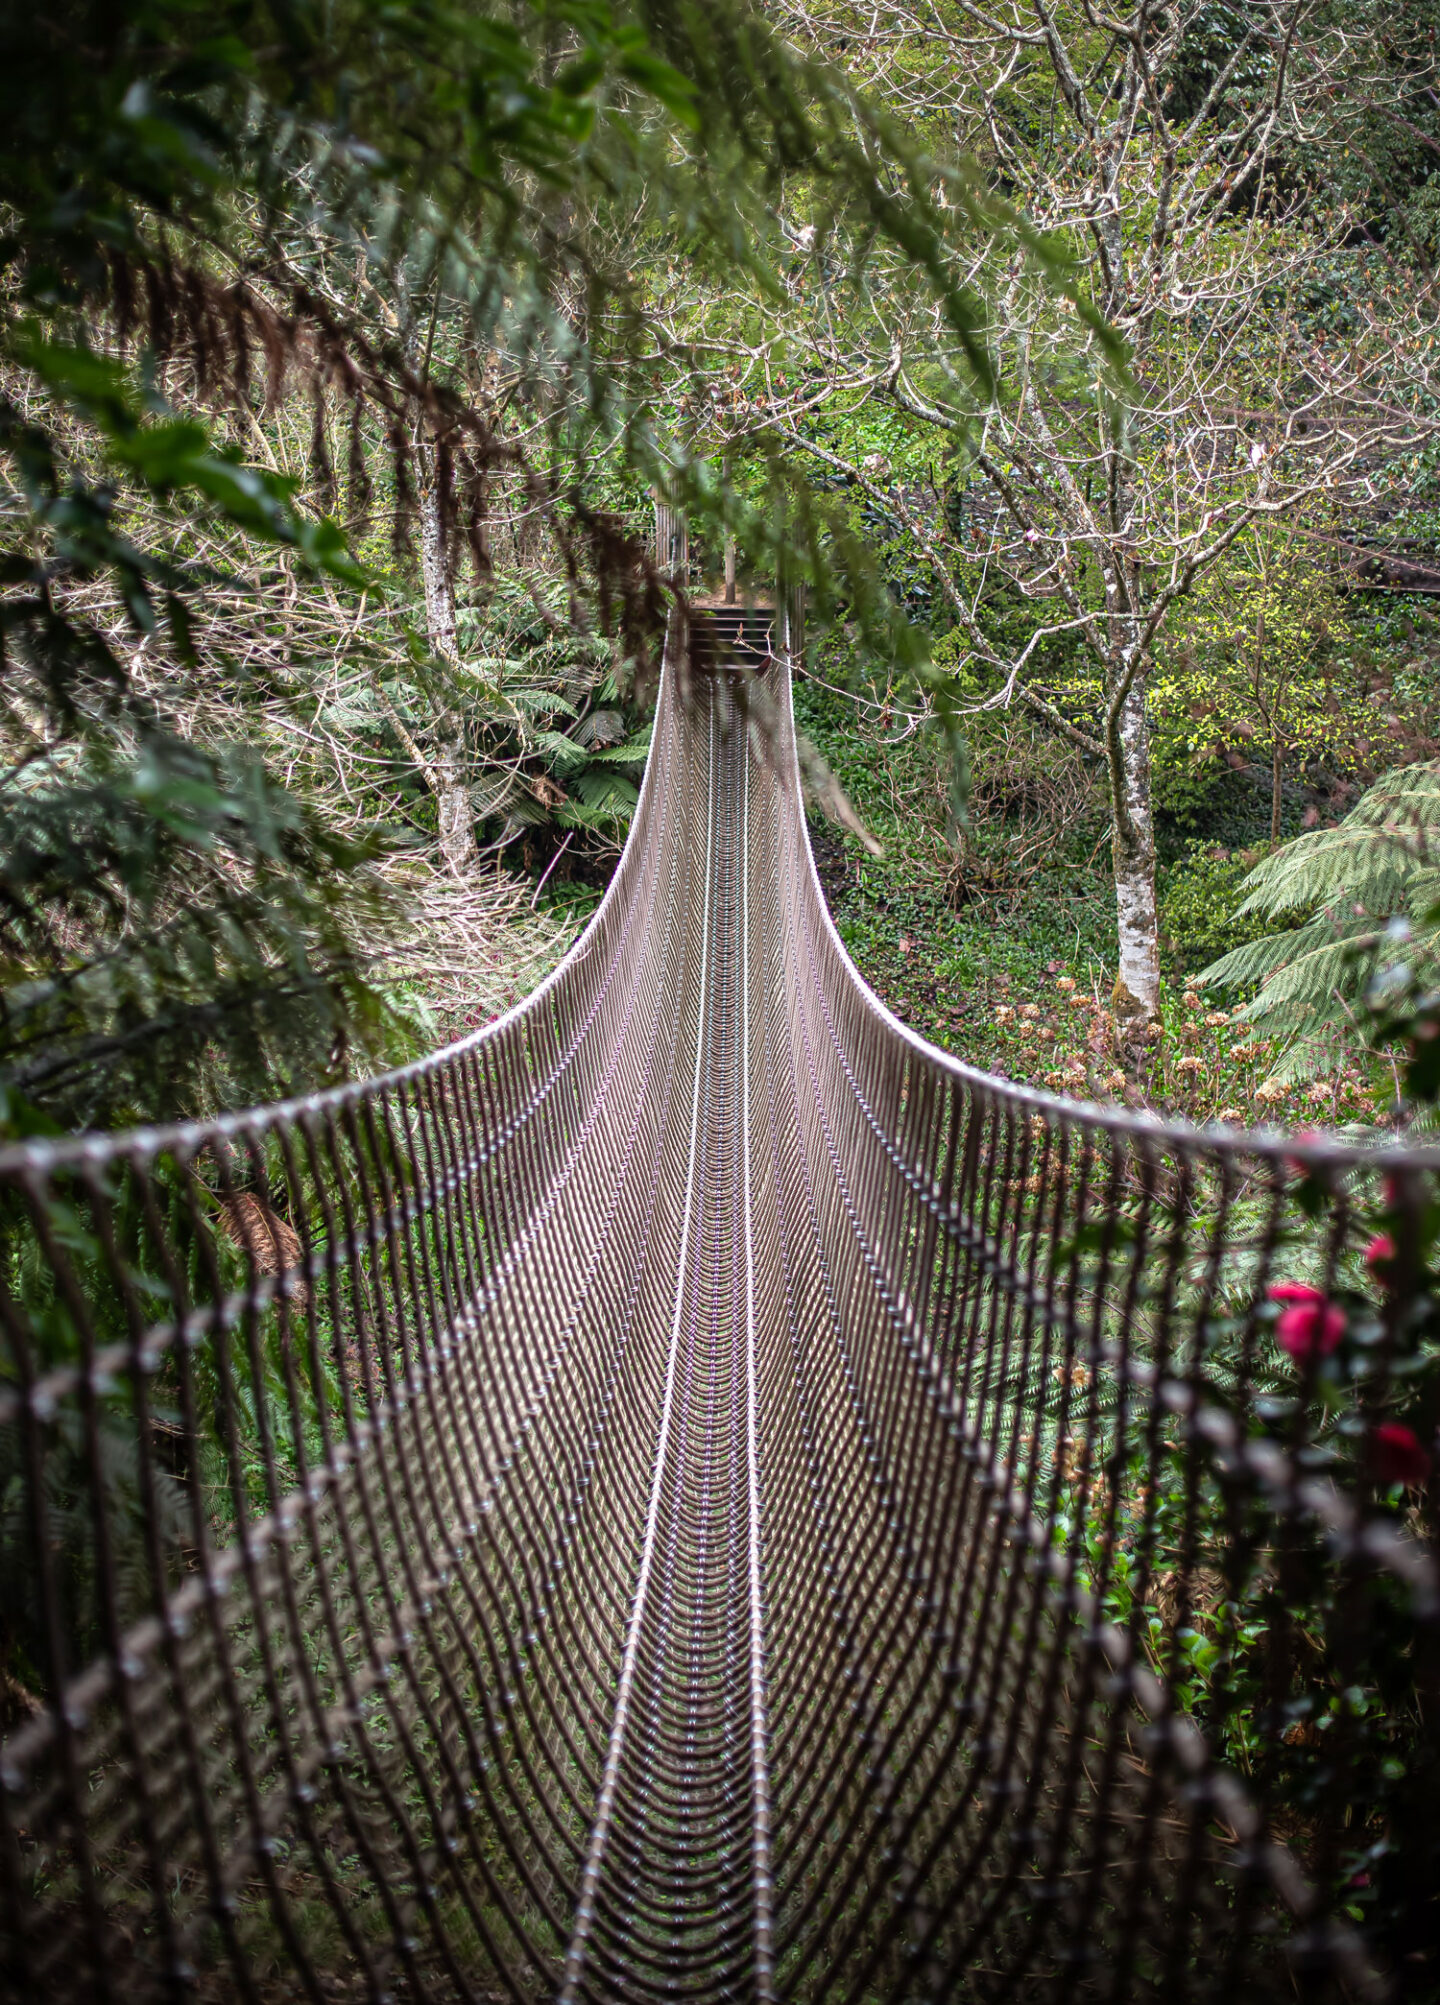 A long, narrow suspension bridge stretches across a lush forest in Cornwall, surrounded by dense greenery and tall trees. The bridge's intricate netting creates a captivating pattern as it leads into the distance, blending harmoniously with the natural landscape. The serene and adventurous atmosphere invites exploration and adds a sense of excitement to the tranquil forest setting.